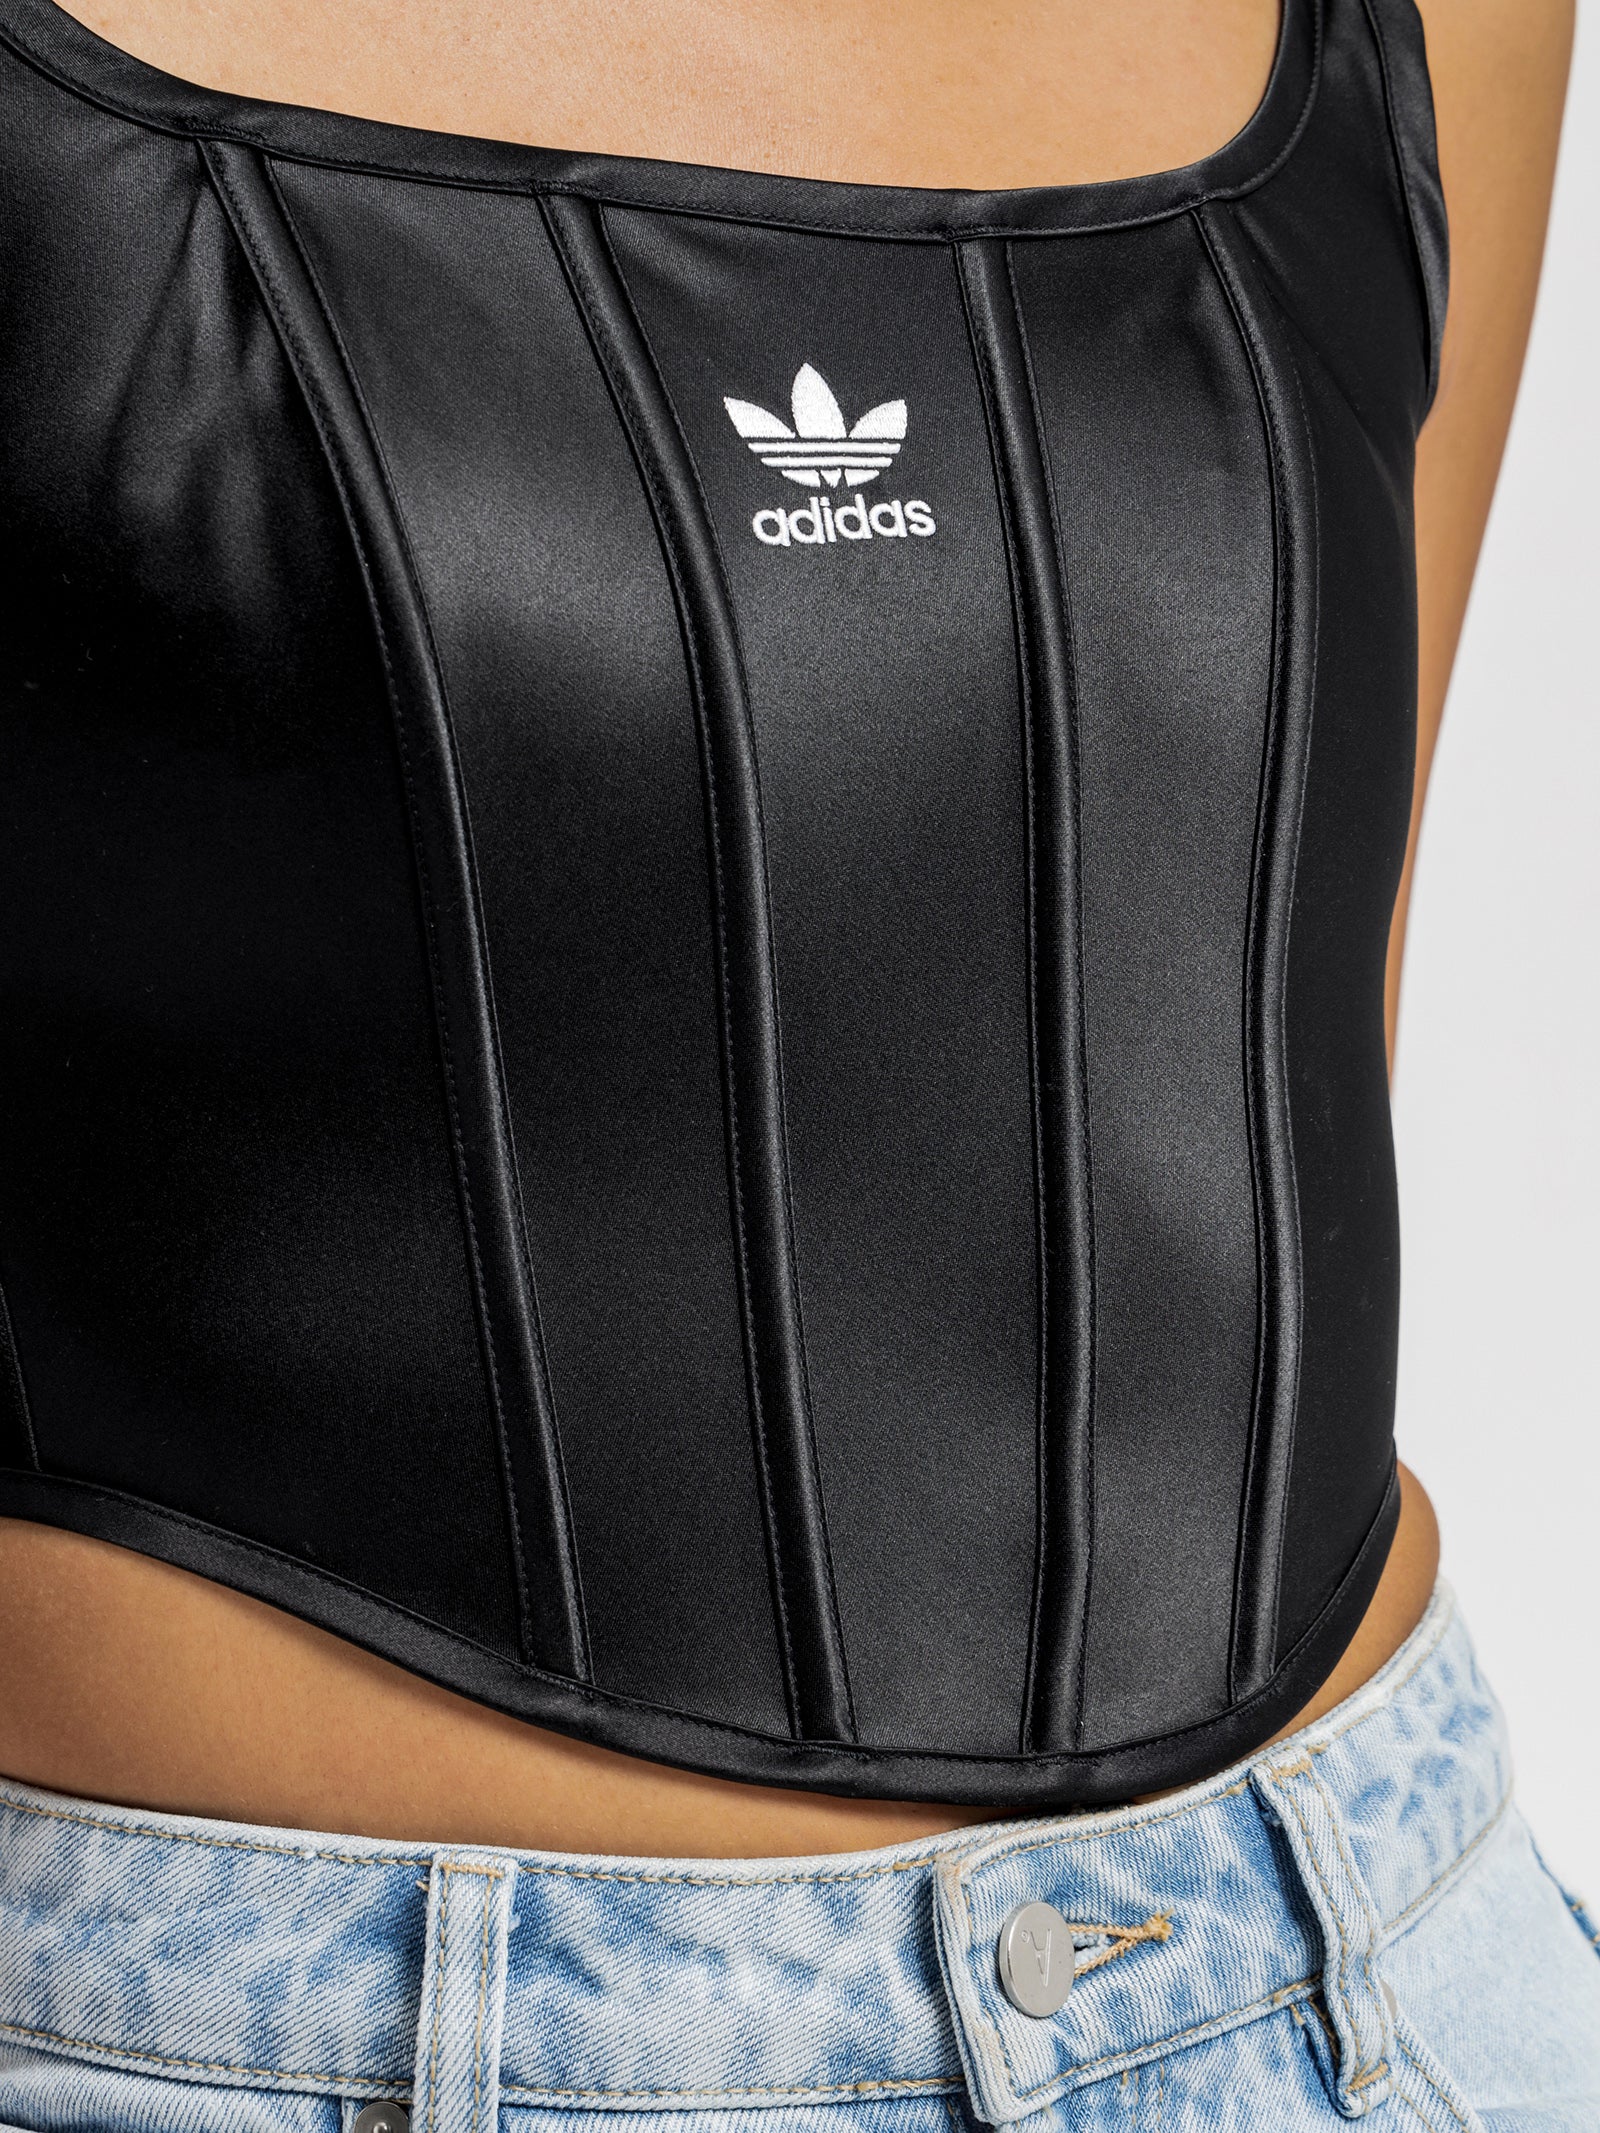 Adidas Corset Black, END. in 2023